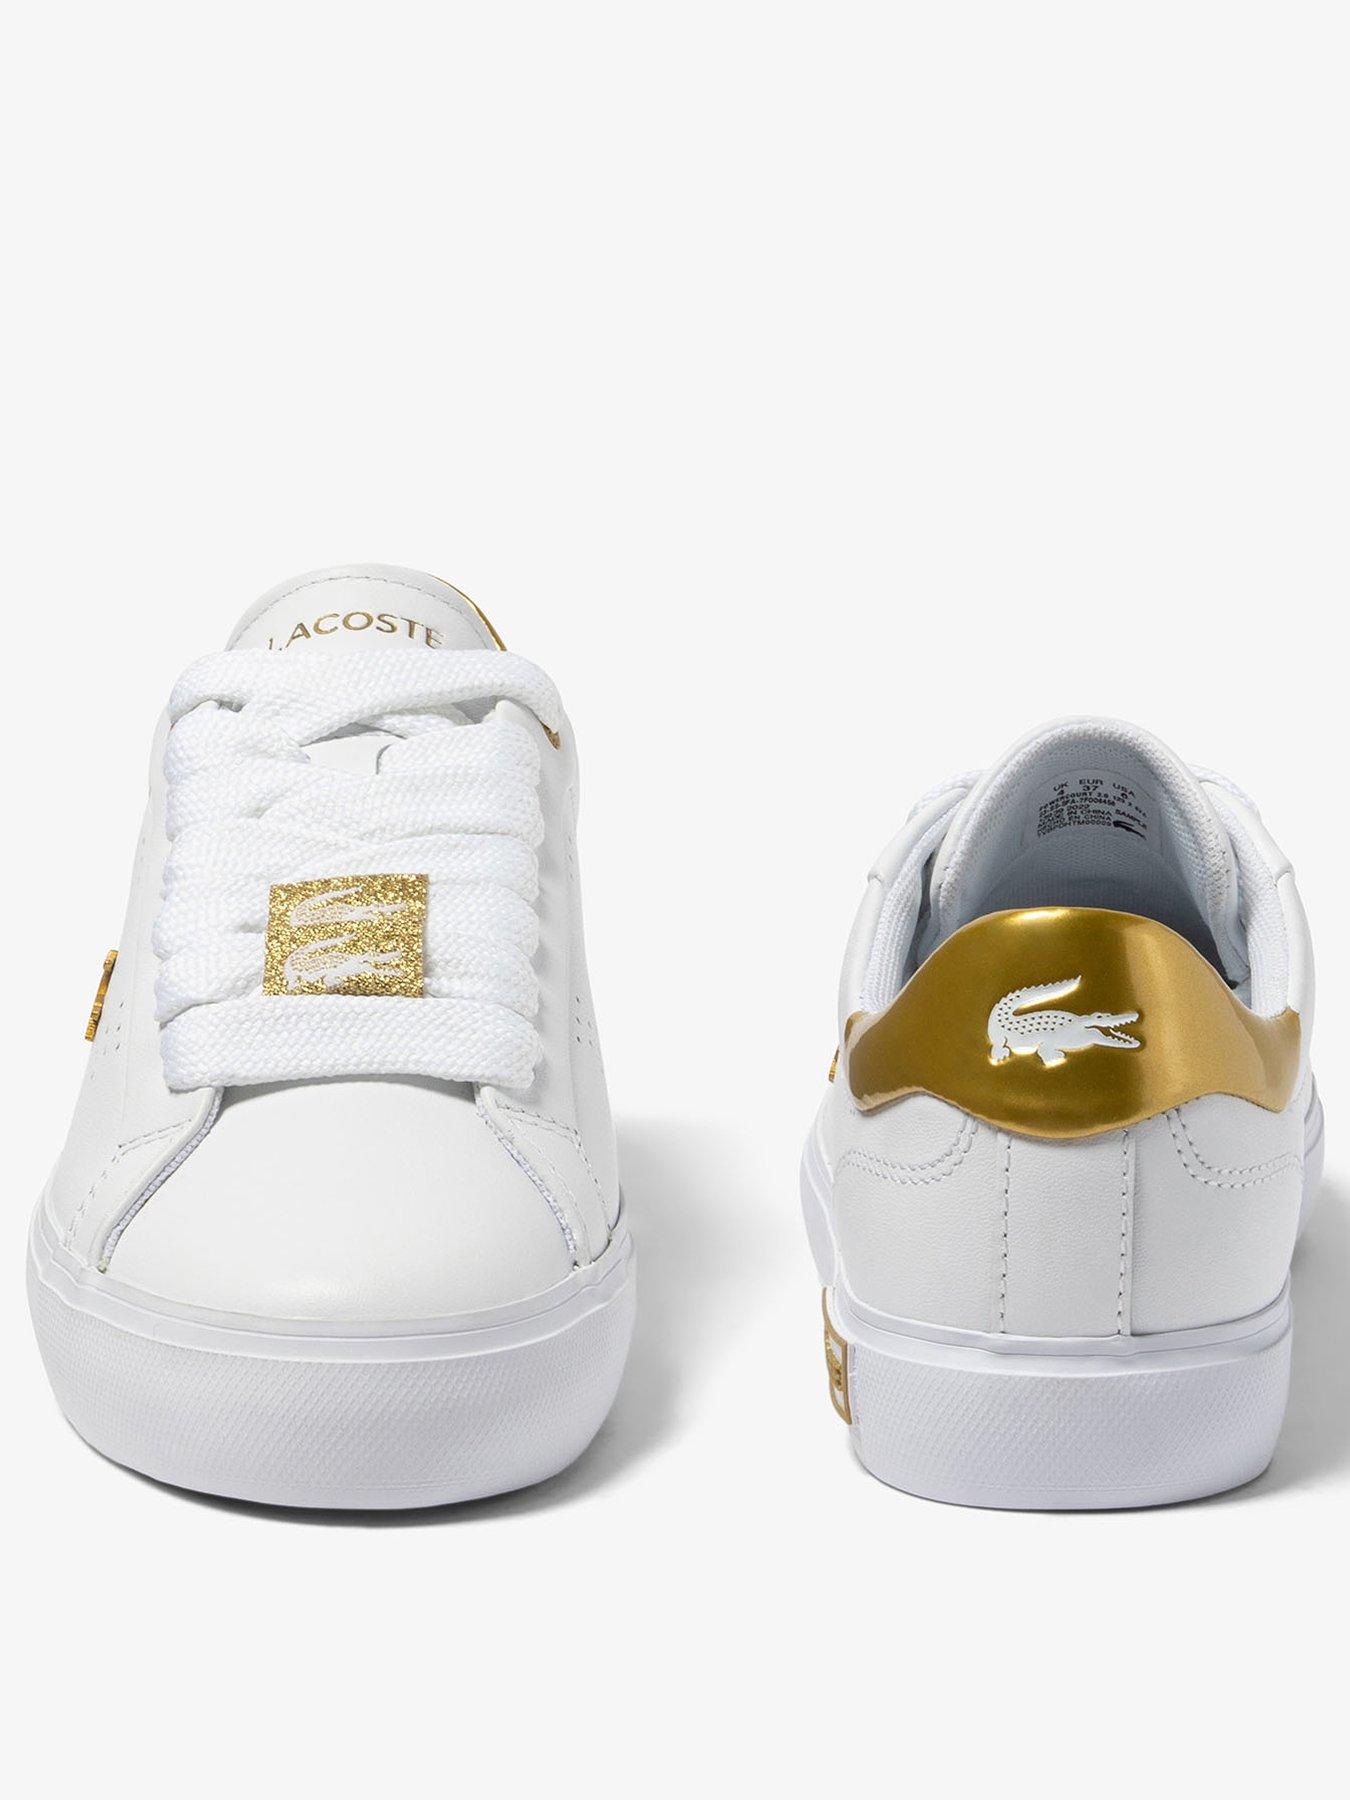 Lacoste Powercourt 2.0 Trainers - White/Gold | very.co.uk